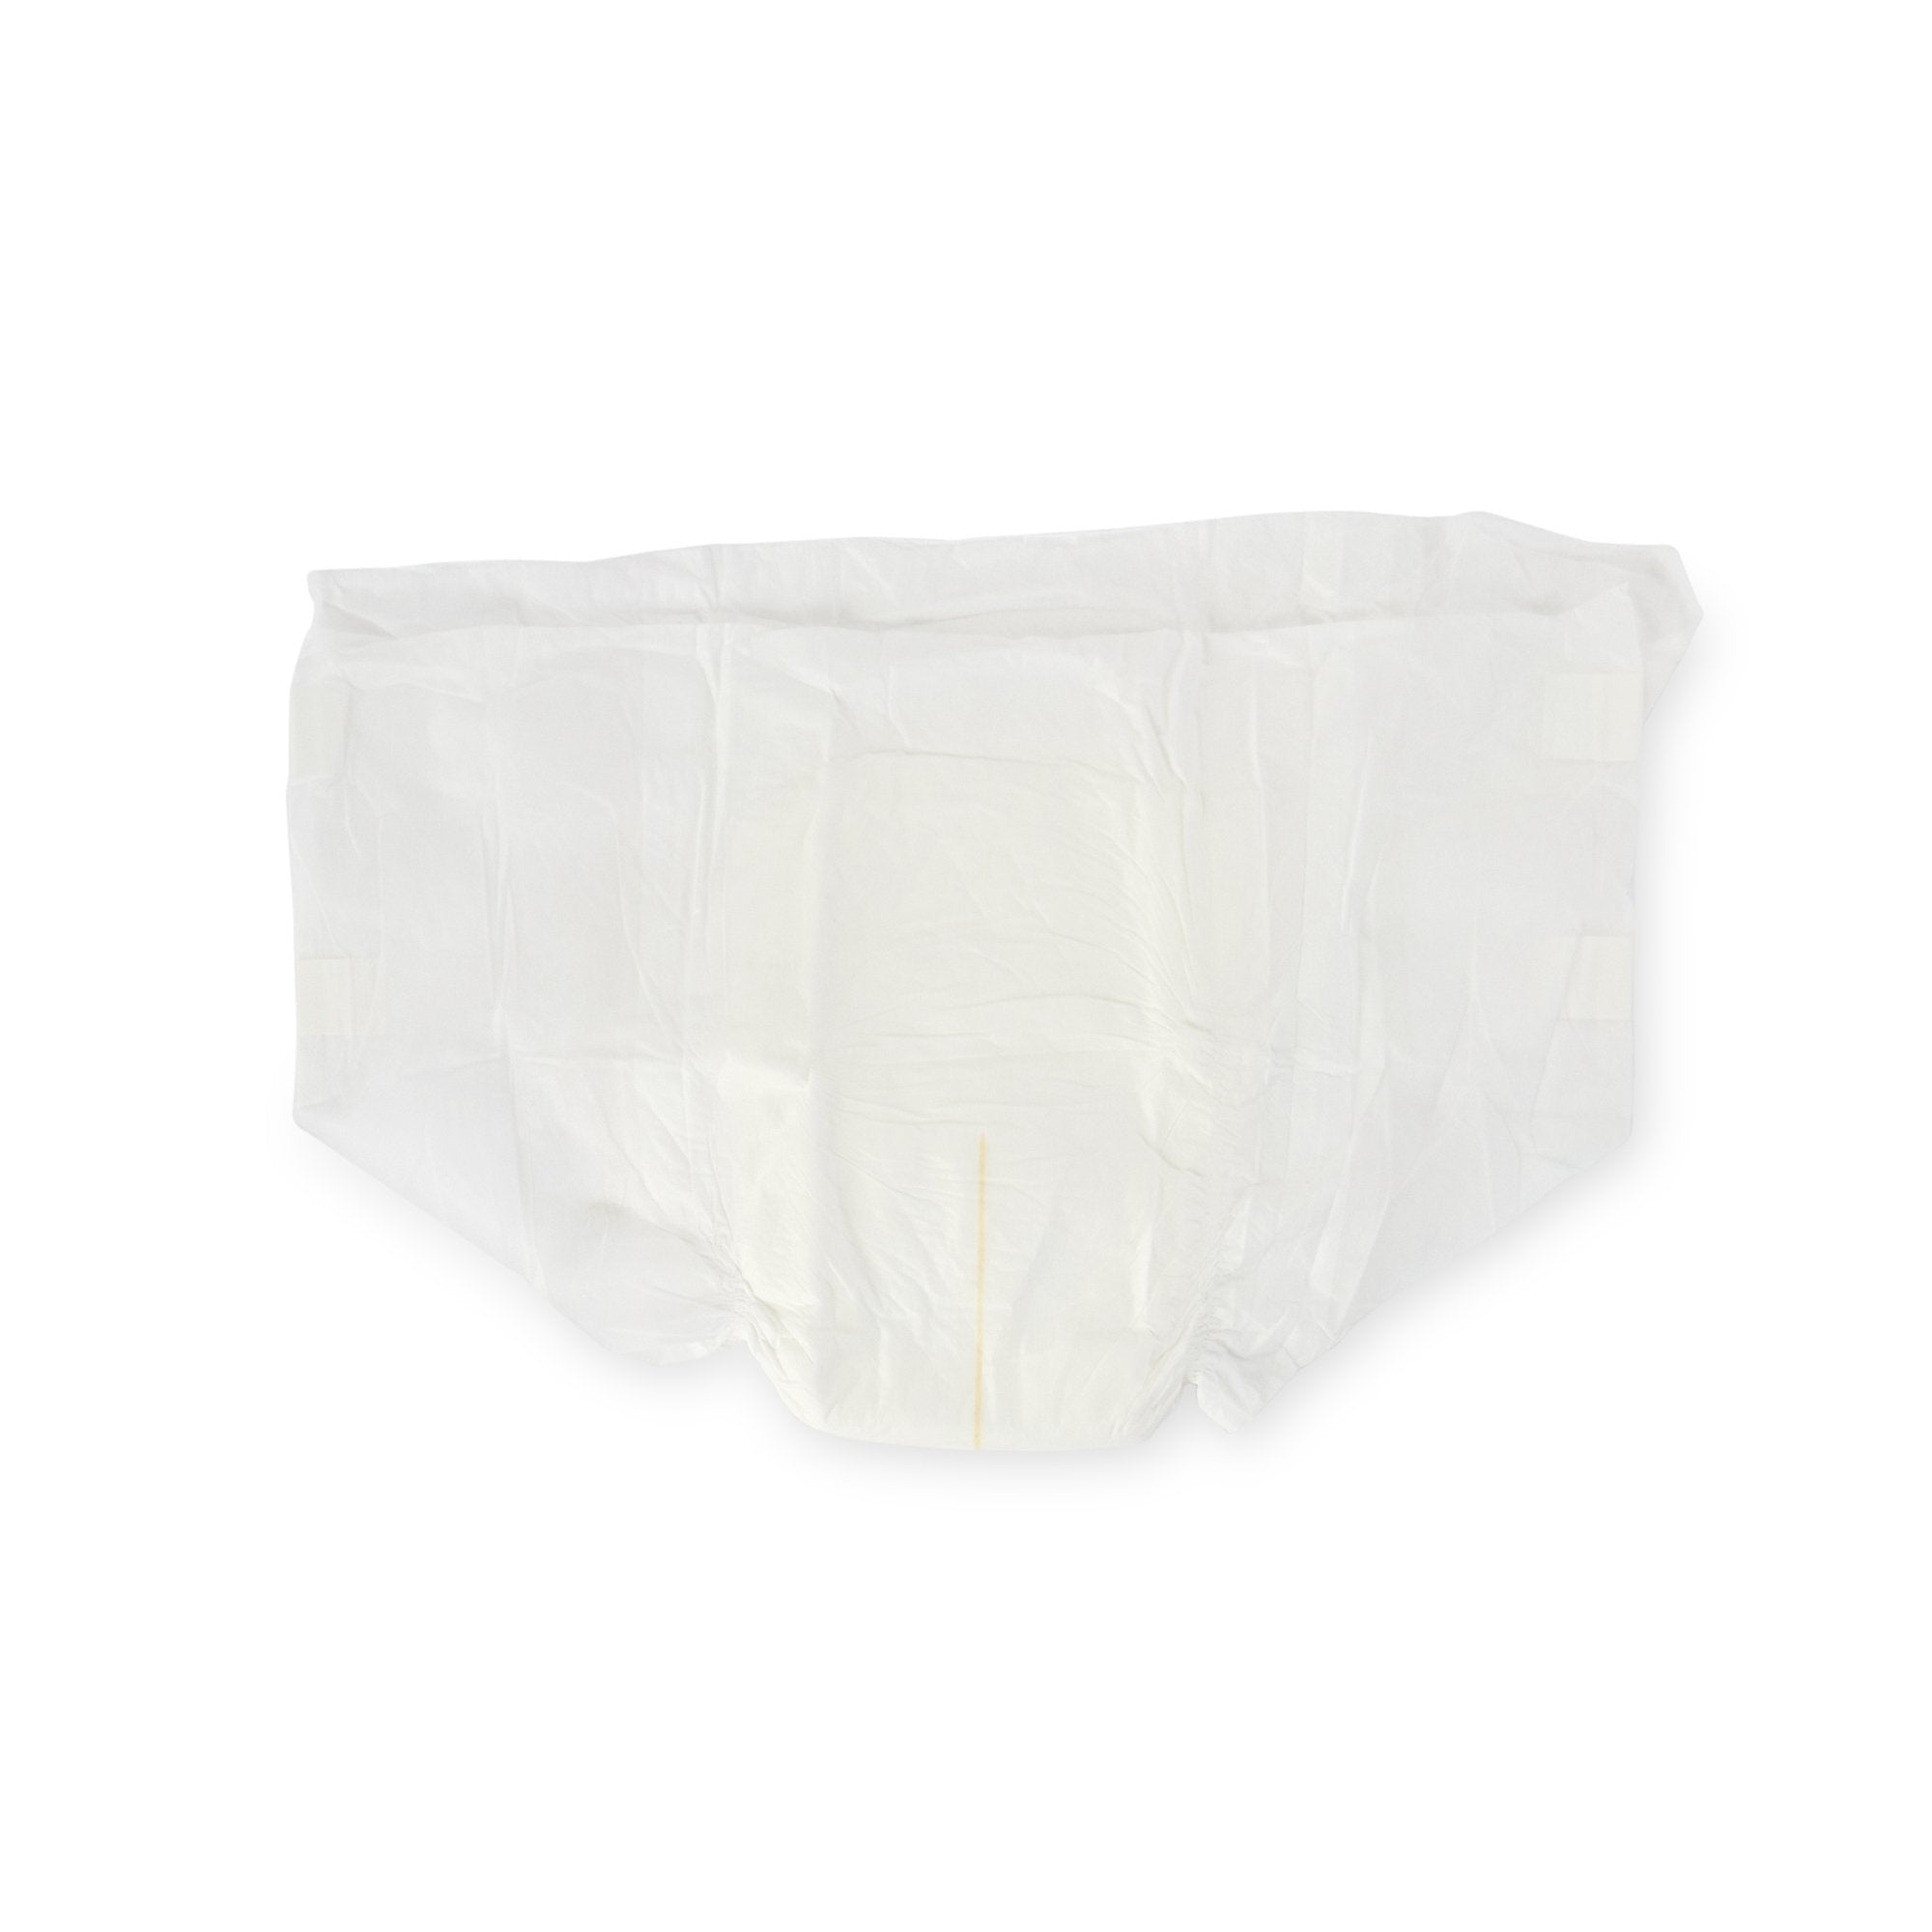 Unisex Adult Incontinence Brief Wings™ Super Medium Disposable Heavy Absorbency